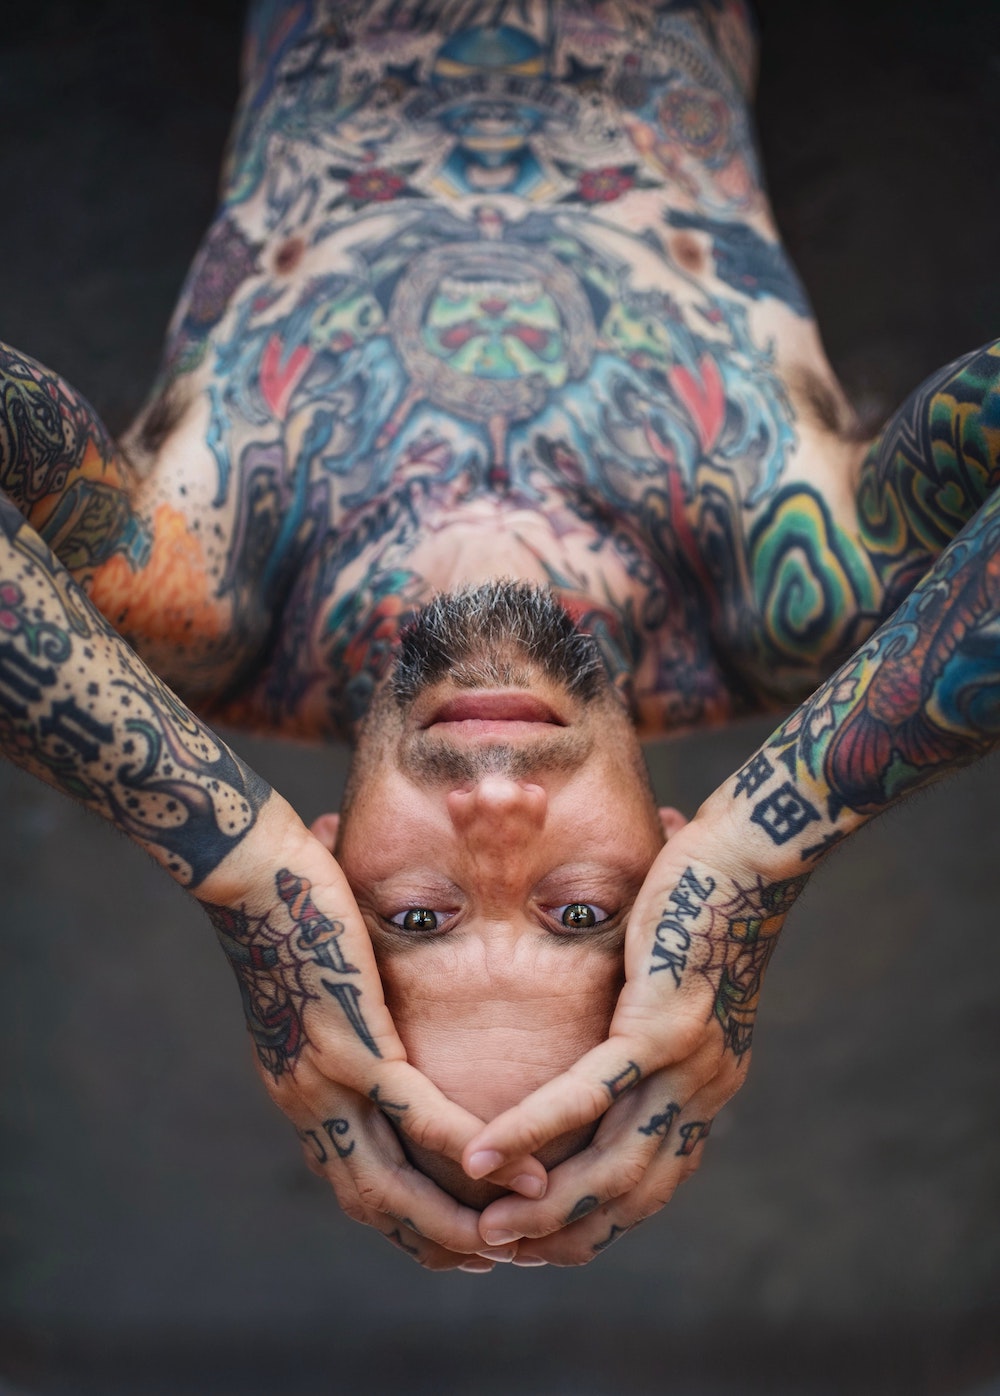 #1 Thing People With Tattoos Regret